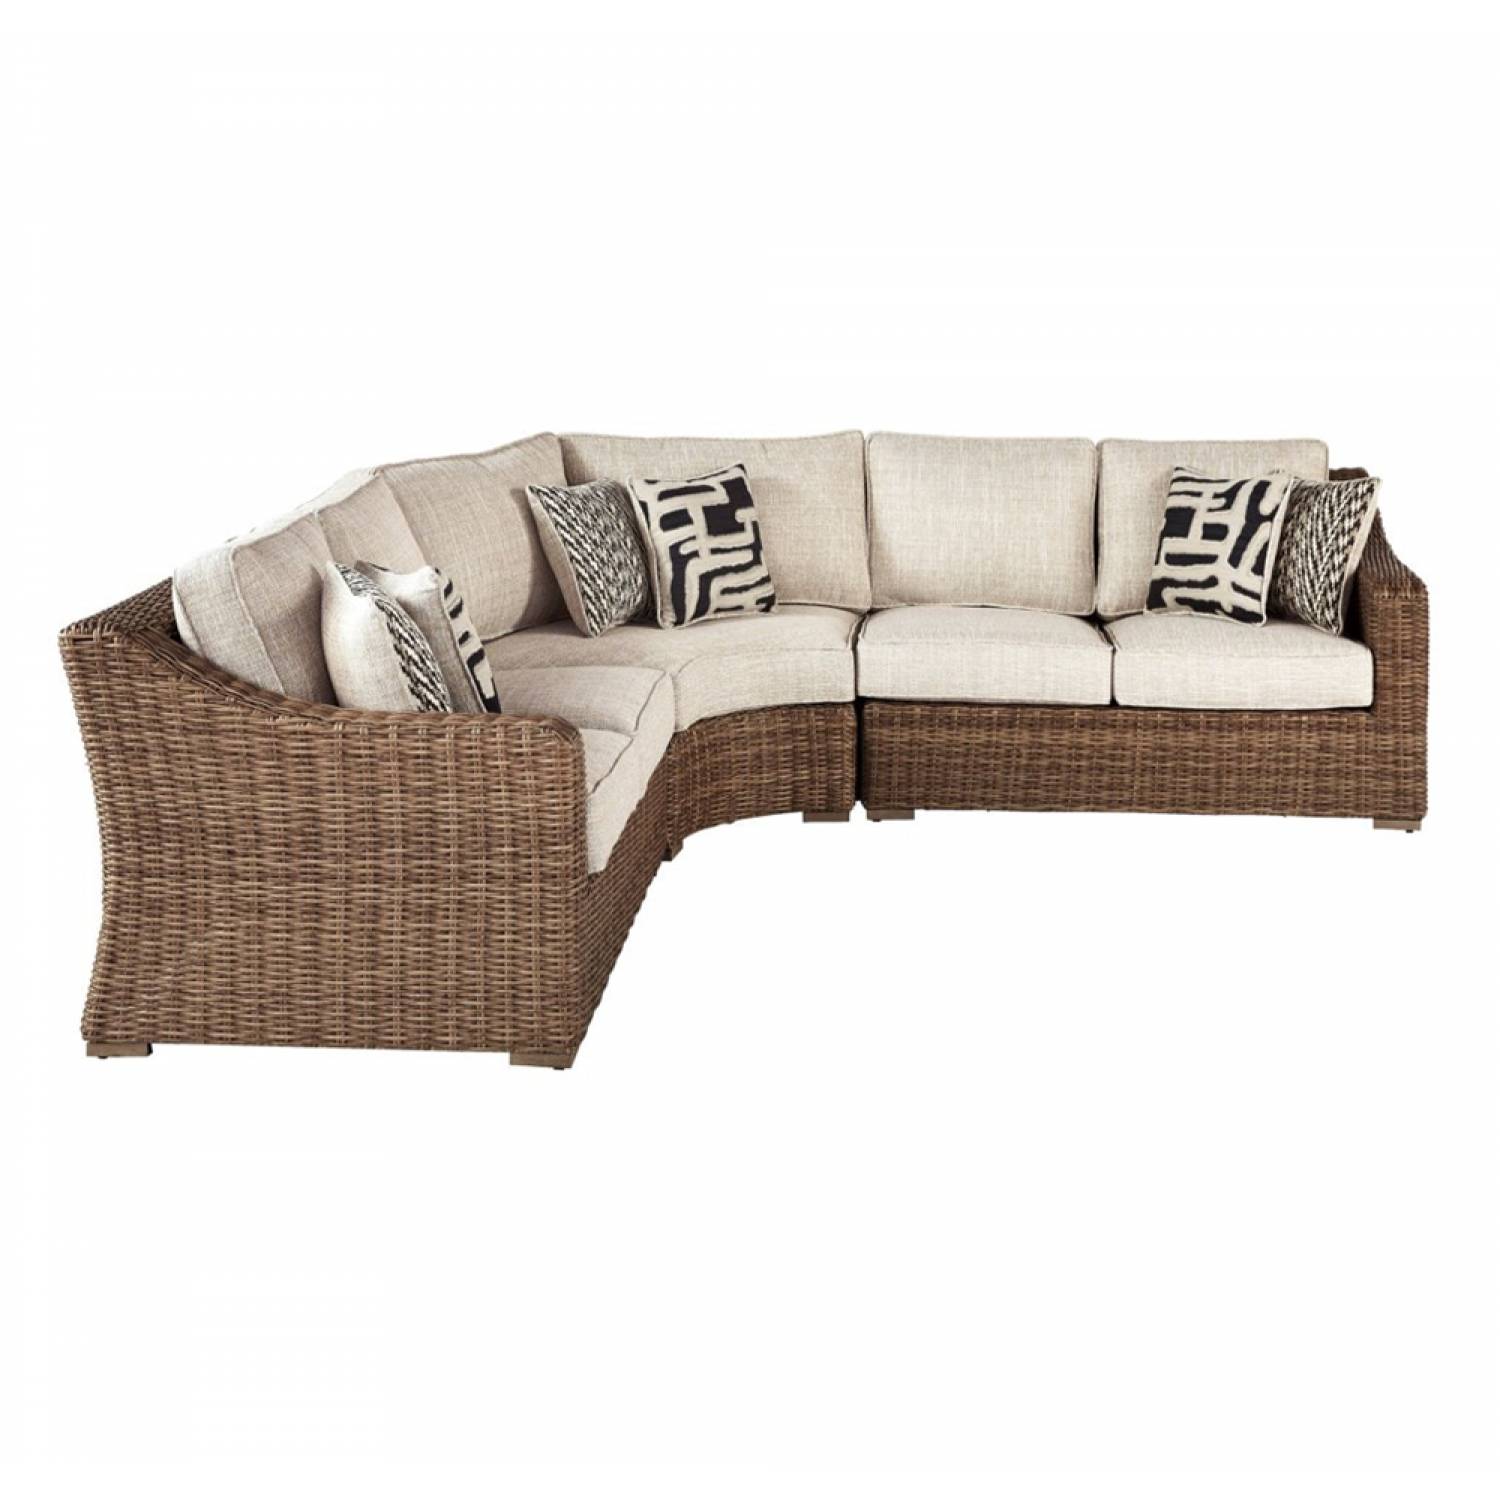 Ashley Furniture Beachcroft Outdoor, Ashley Furniture Outdoor Seating Sets